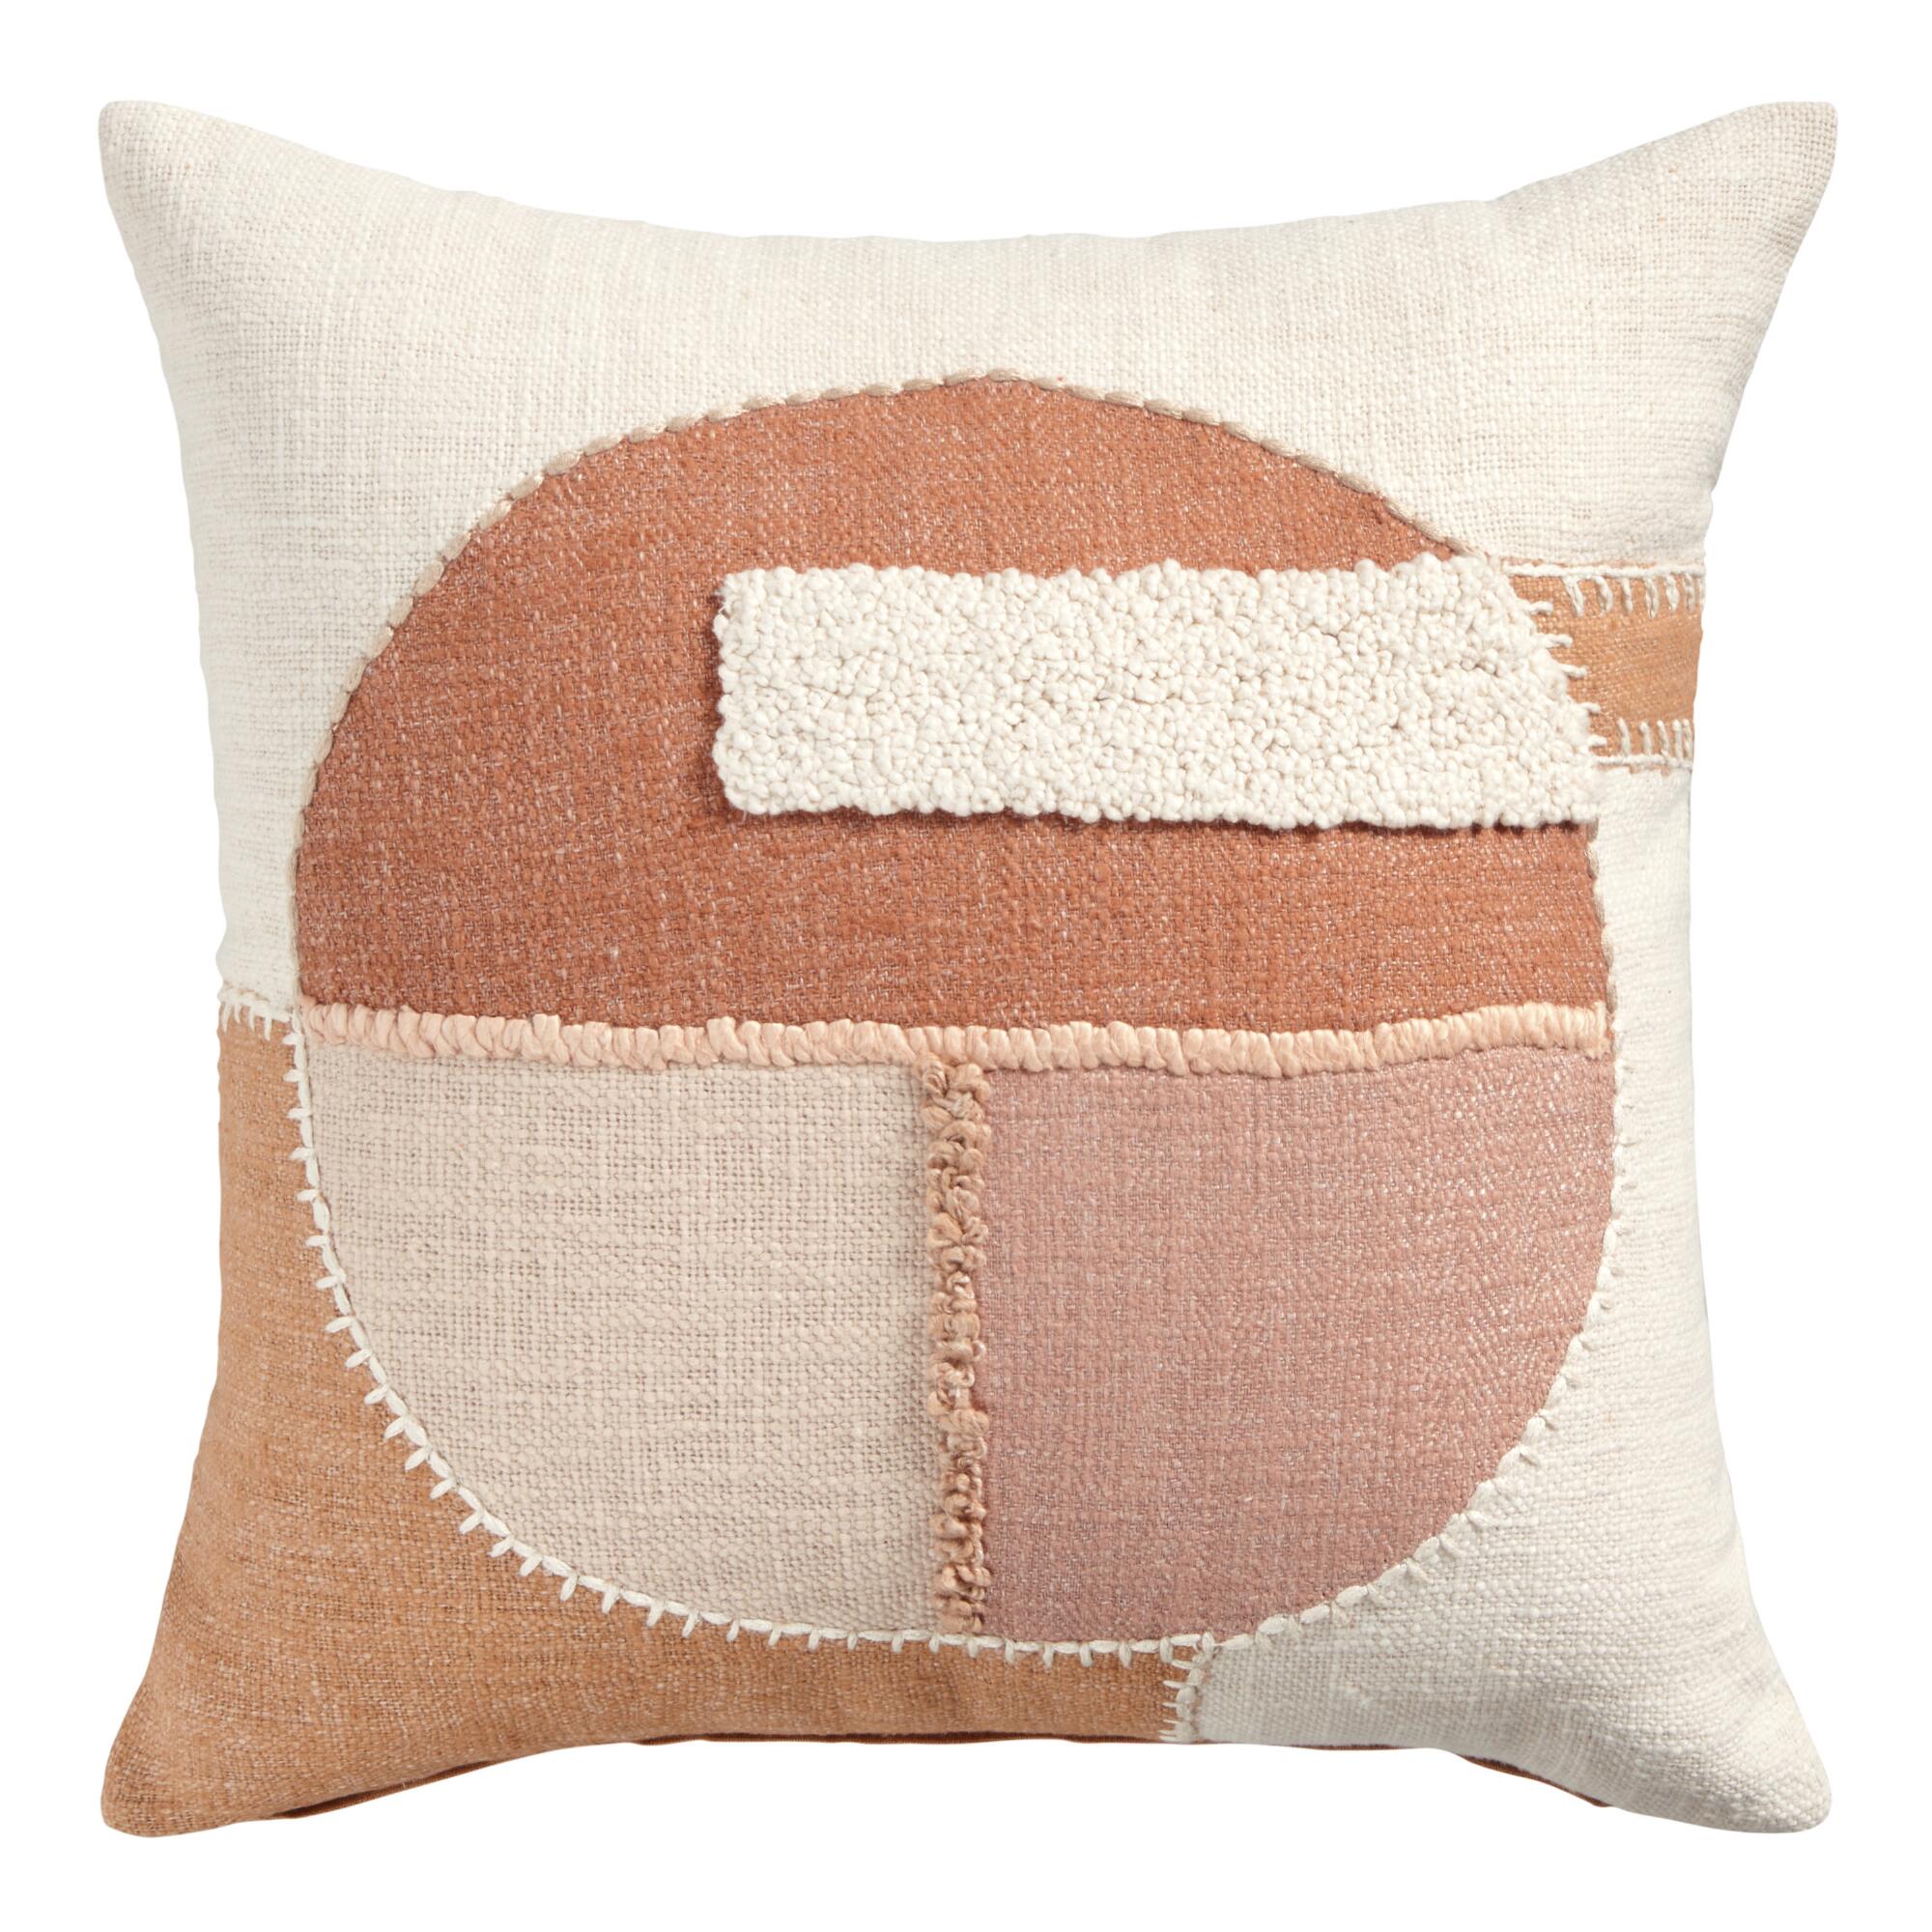 Rust and Blush Geo Circle Throw Pillow by World Market